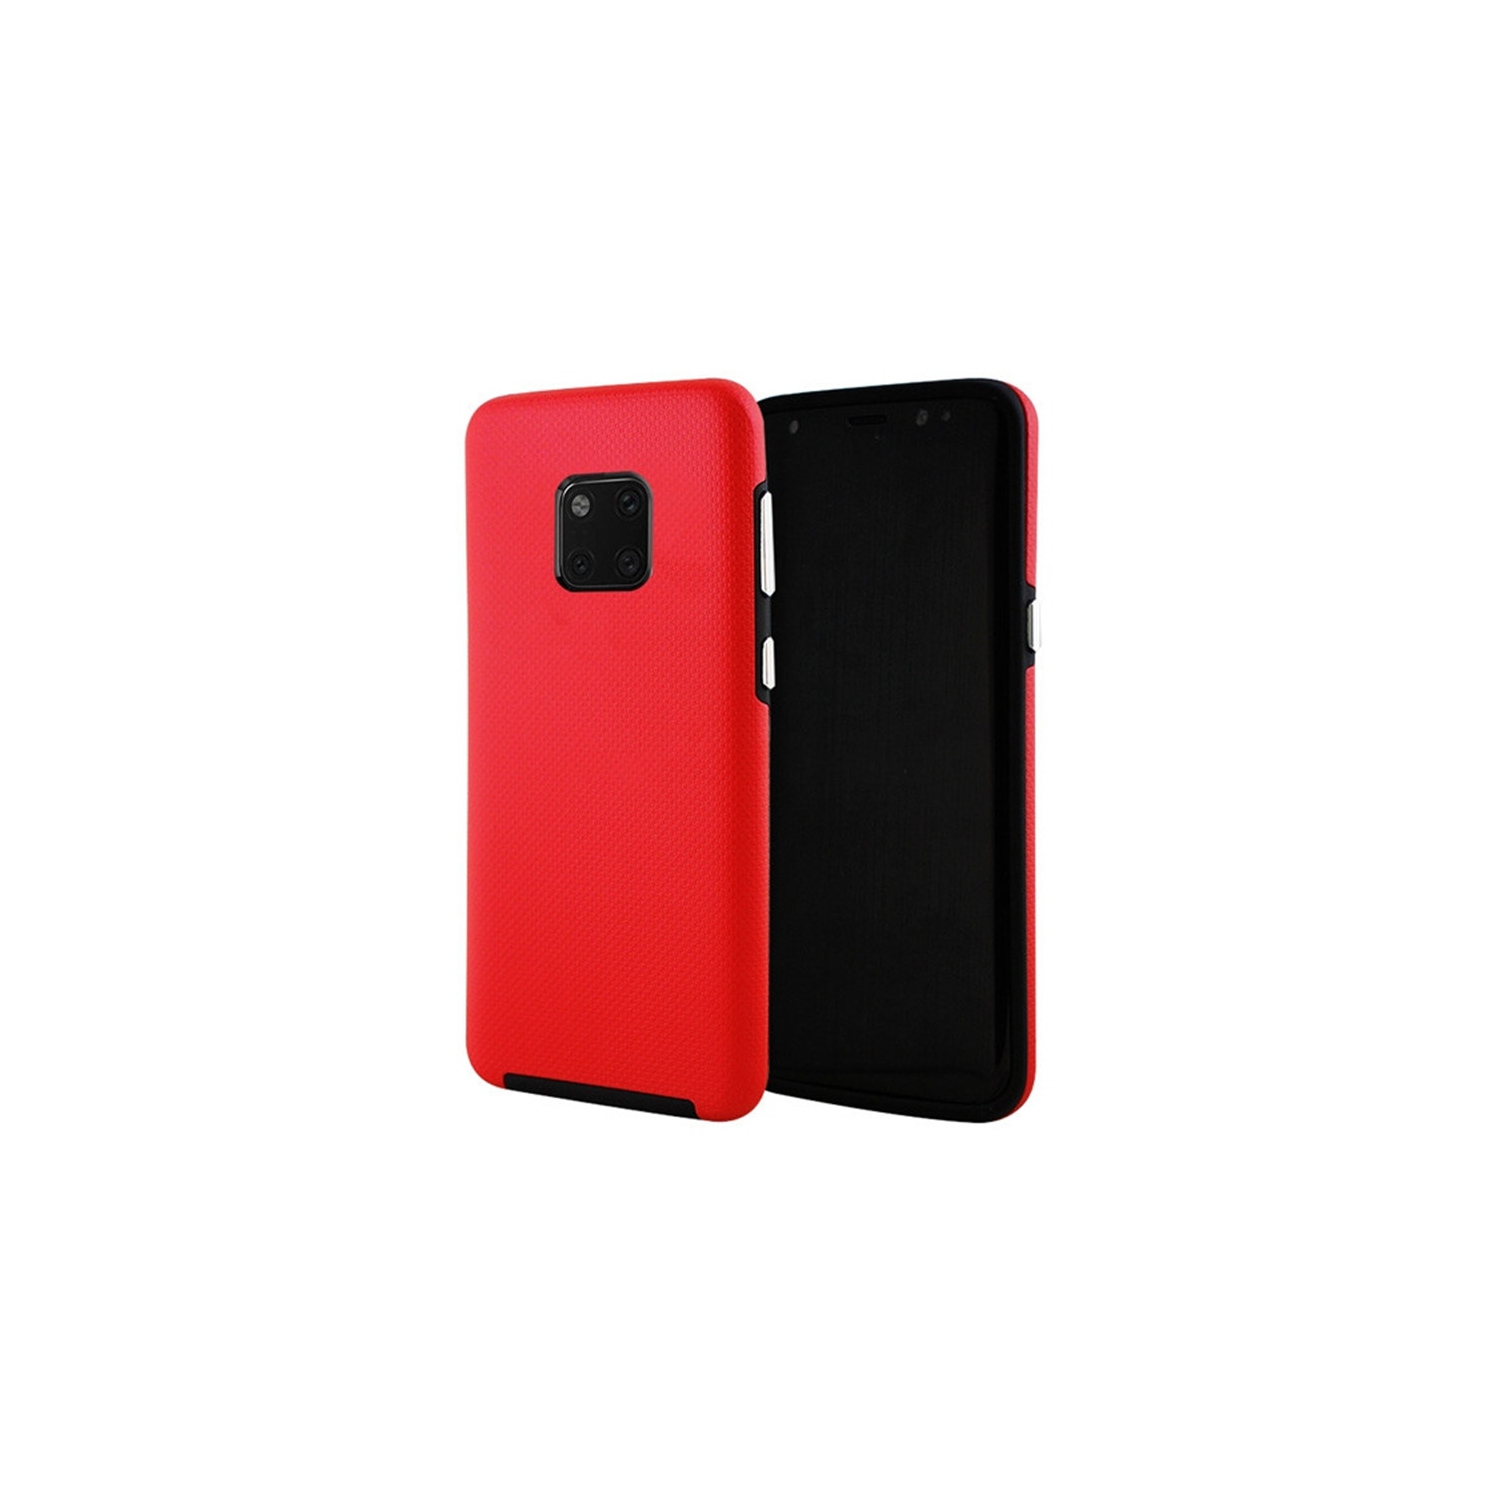 【CSmart】 Slim Fitted Hybrid Hard PC Shell Shockproof Scratch Resistant Case Cover for Huawei Mate 20 Pro, Red